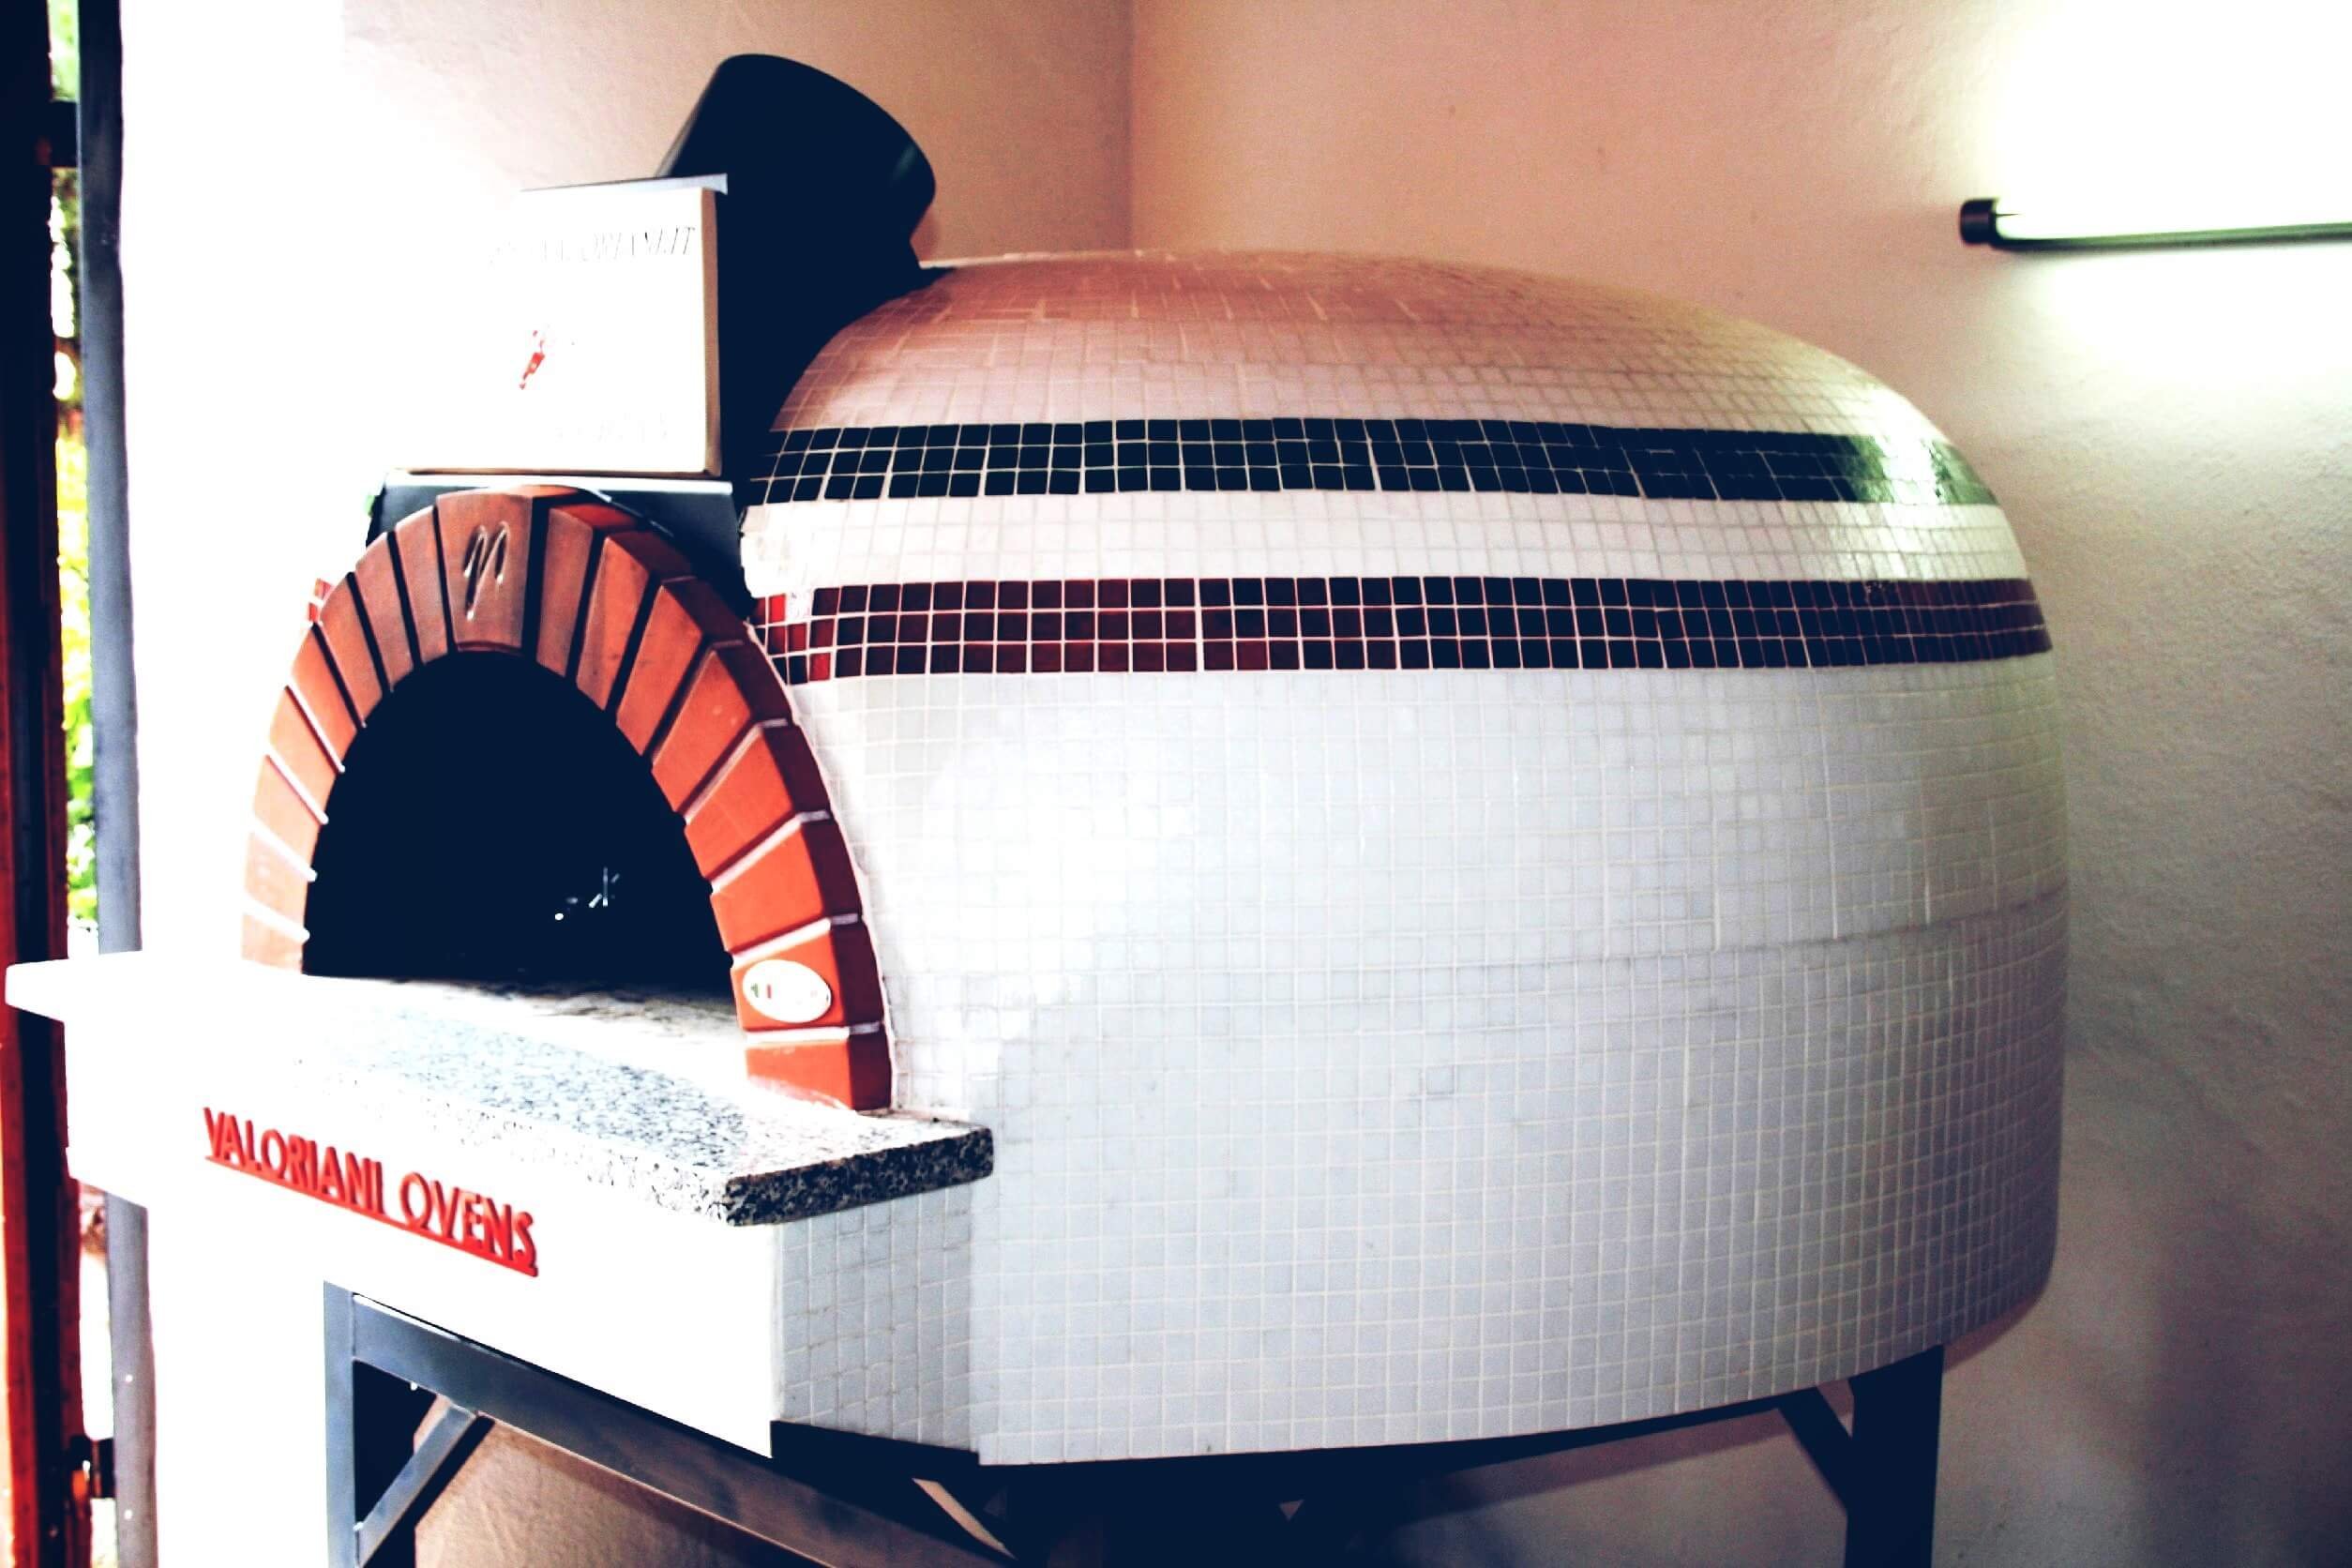 Professional pizza and baking oven, wood firing for continuous firing, Valoriani Vesuvio GR, 140x160cm